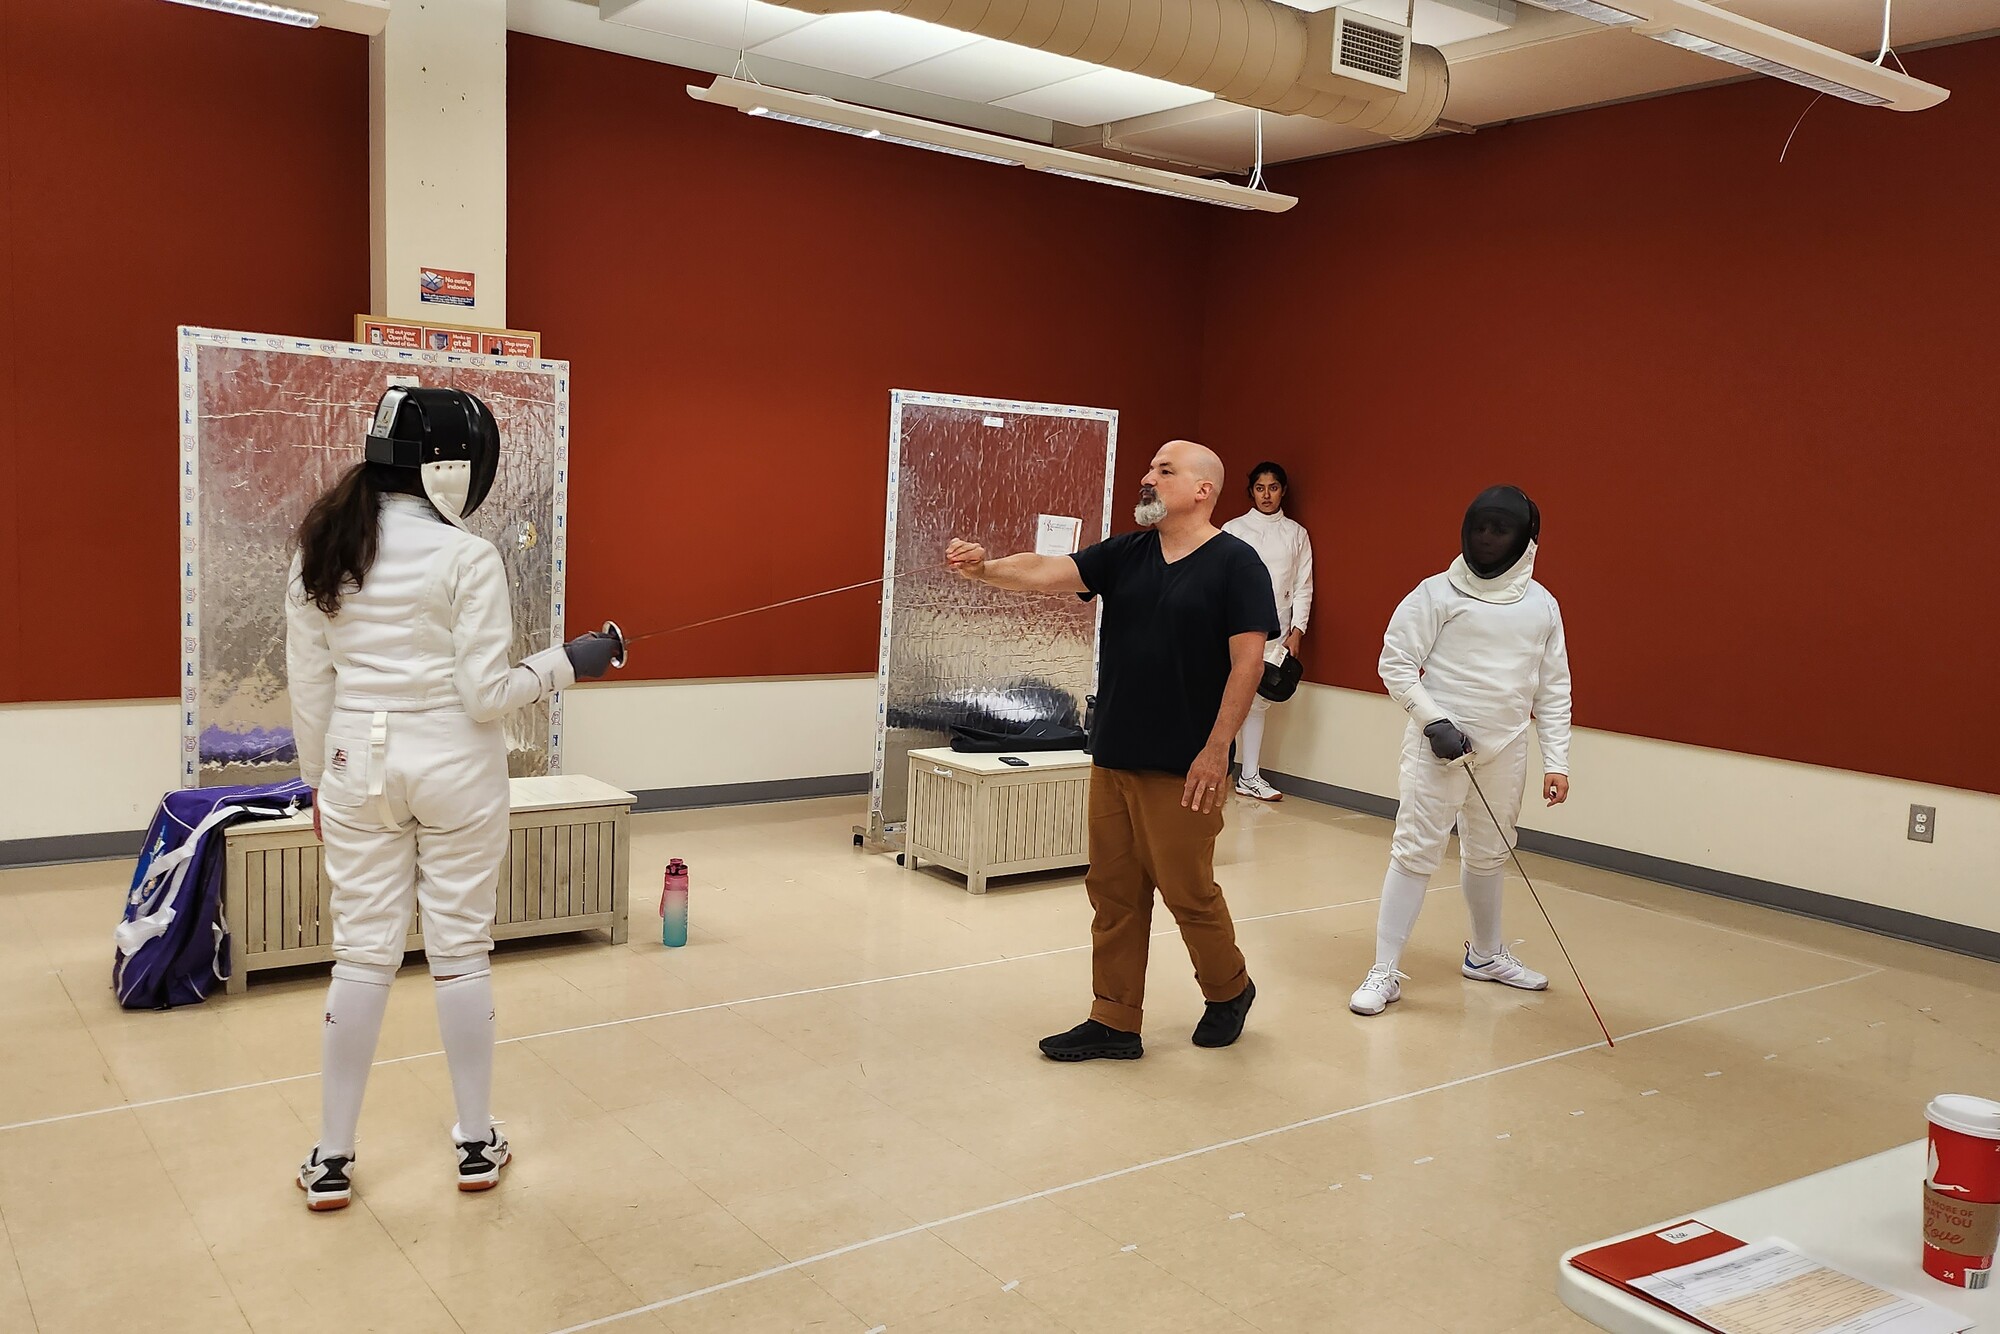 A fencing instructor directs three actors in fencing gear during play rehearsal.